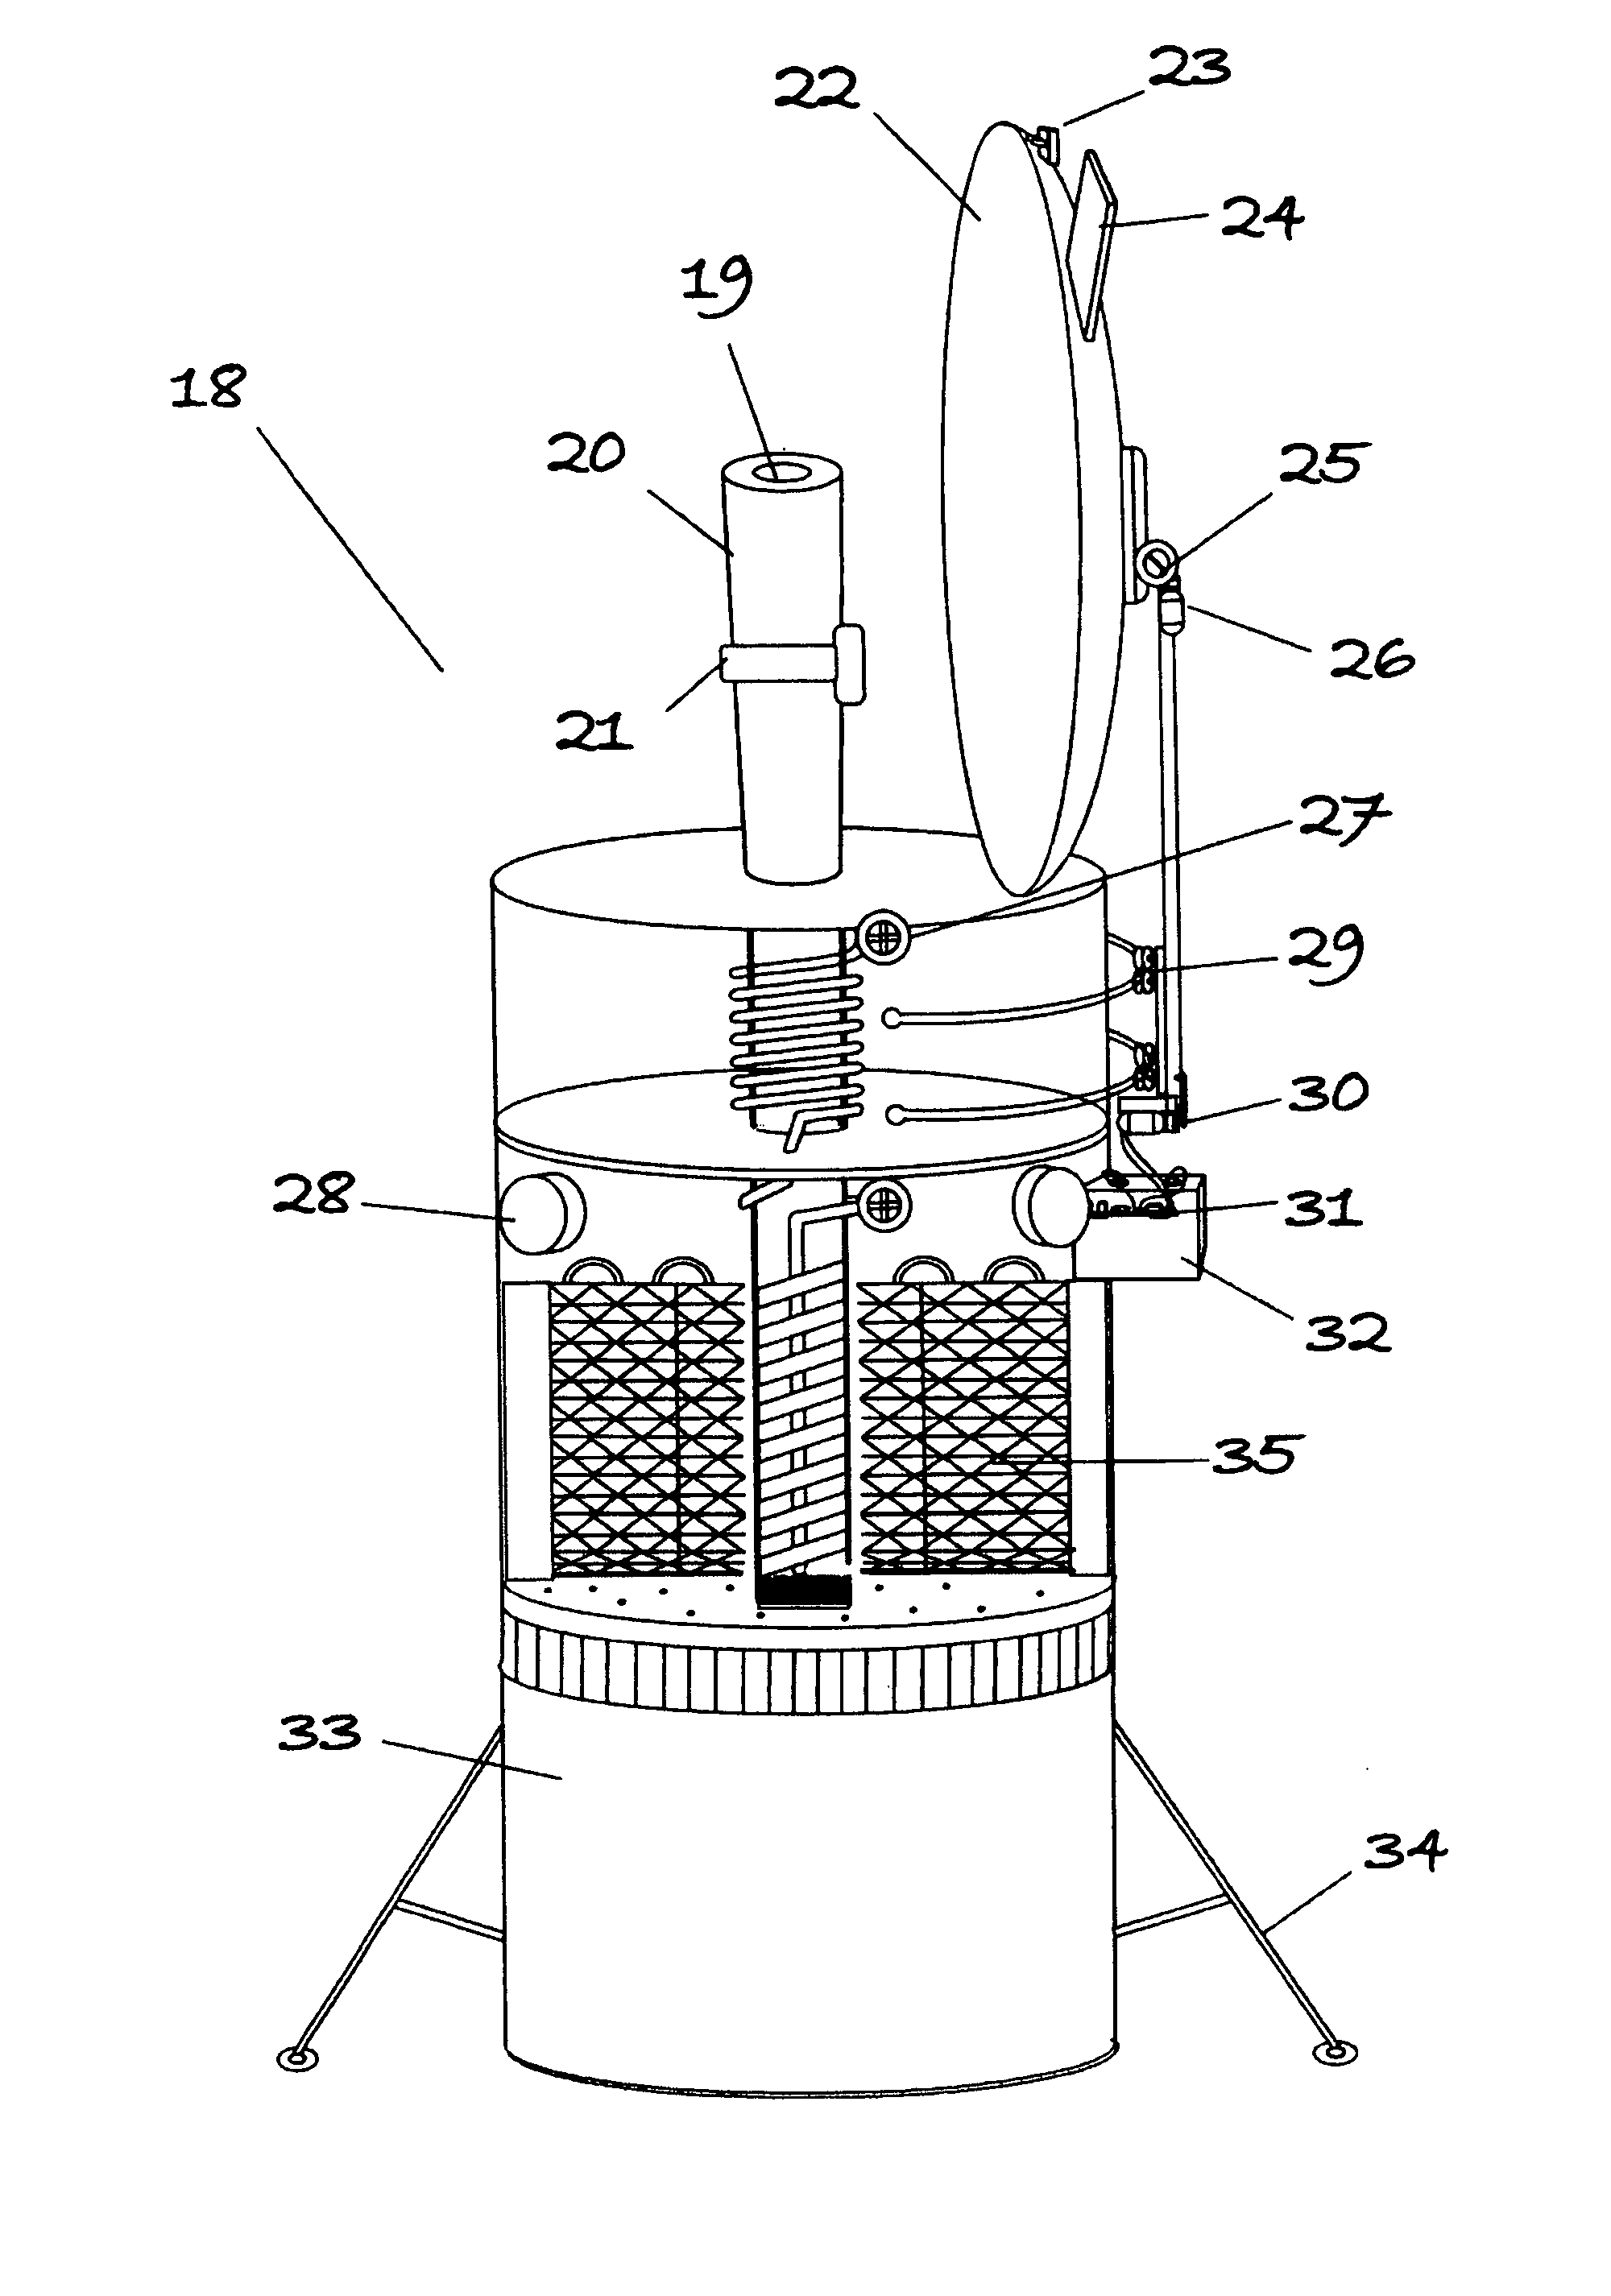 Atmospheric water collection device